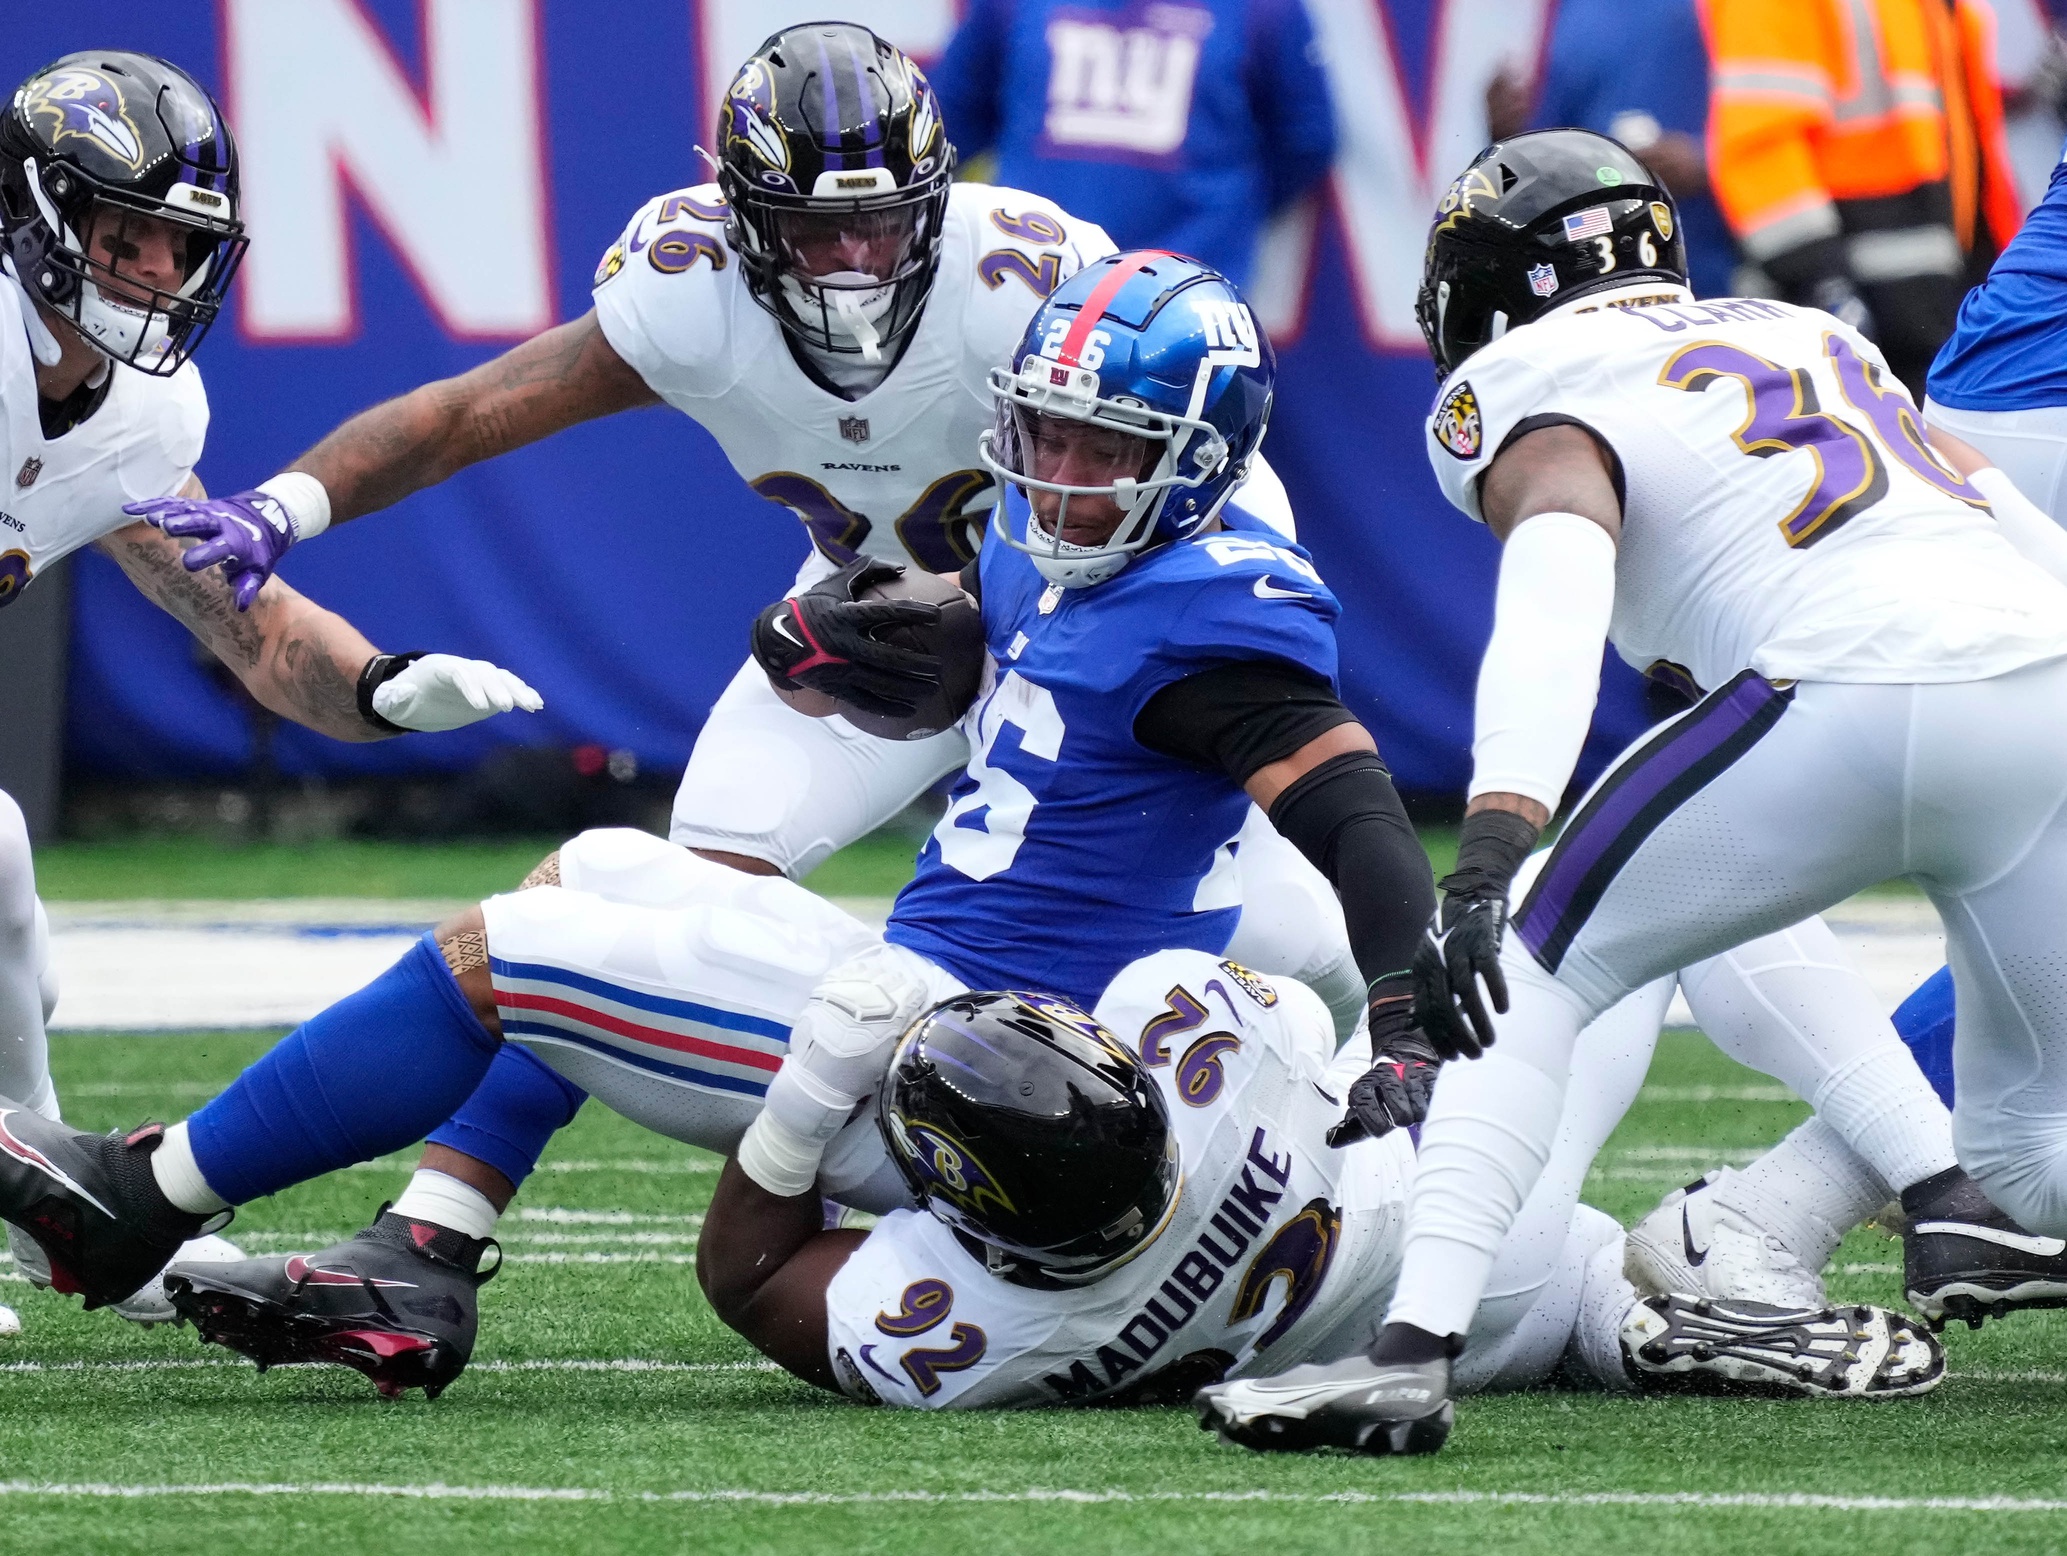 New York Giants running back Saquon Barkley (26) is tackled by Baltimore Ravens defensive tackle Justin Madubuike (92). Mandatory Credit: Robert Deutsch-USA TODAY